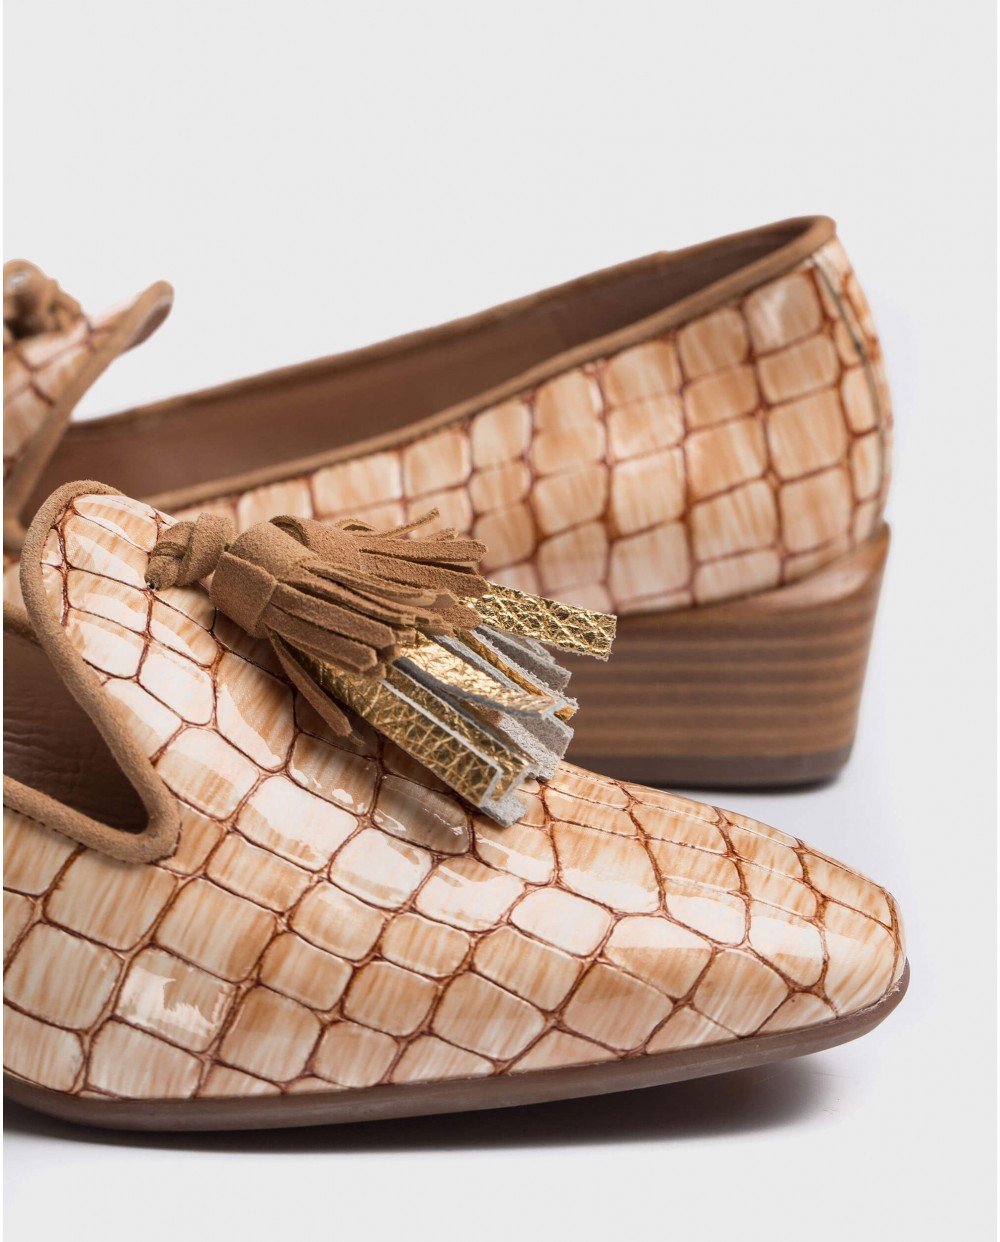 Wonders-Flat Shoes-Moccasin with leather tassels